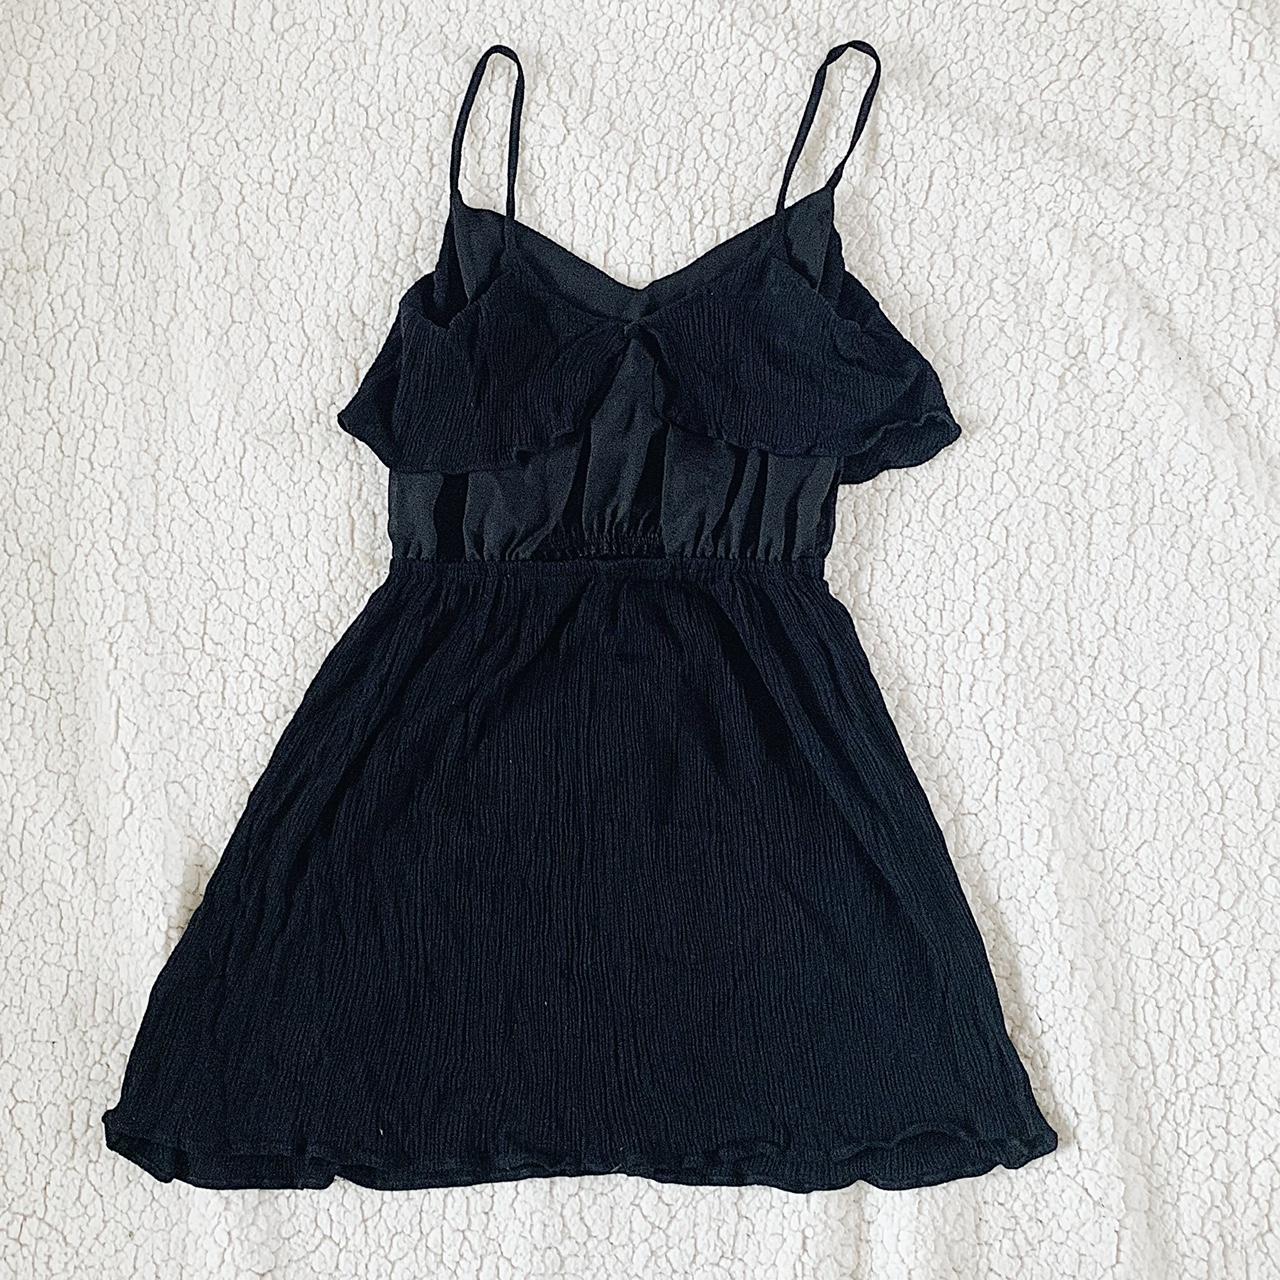 Top shop crinkle #lbd with peek-a-boo-back Size... - Depop